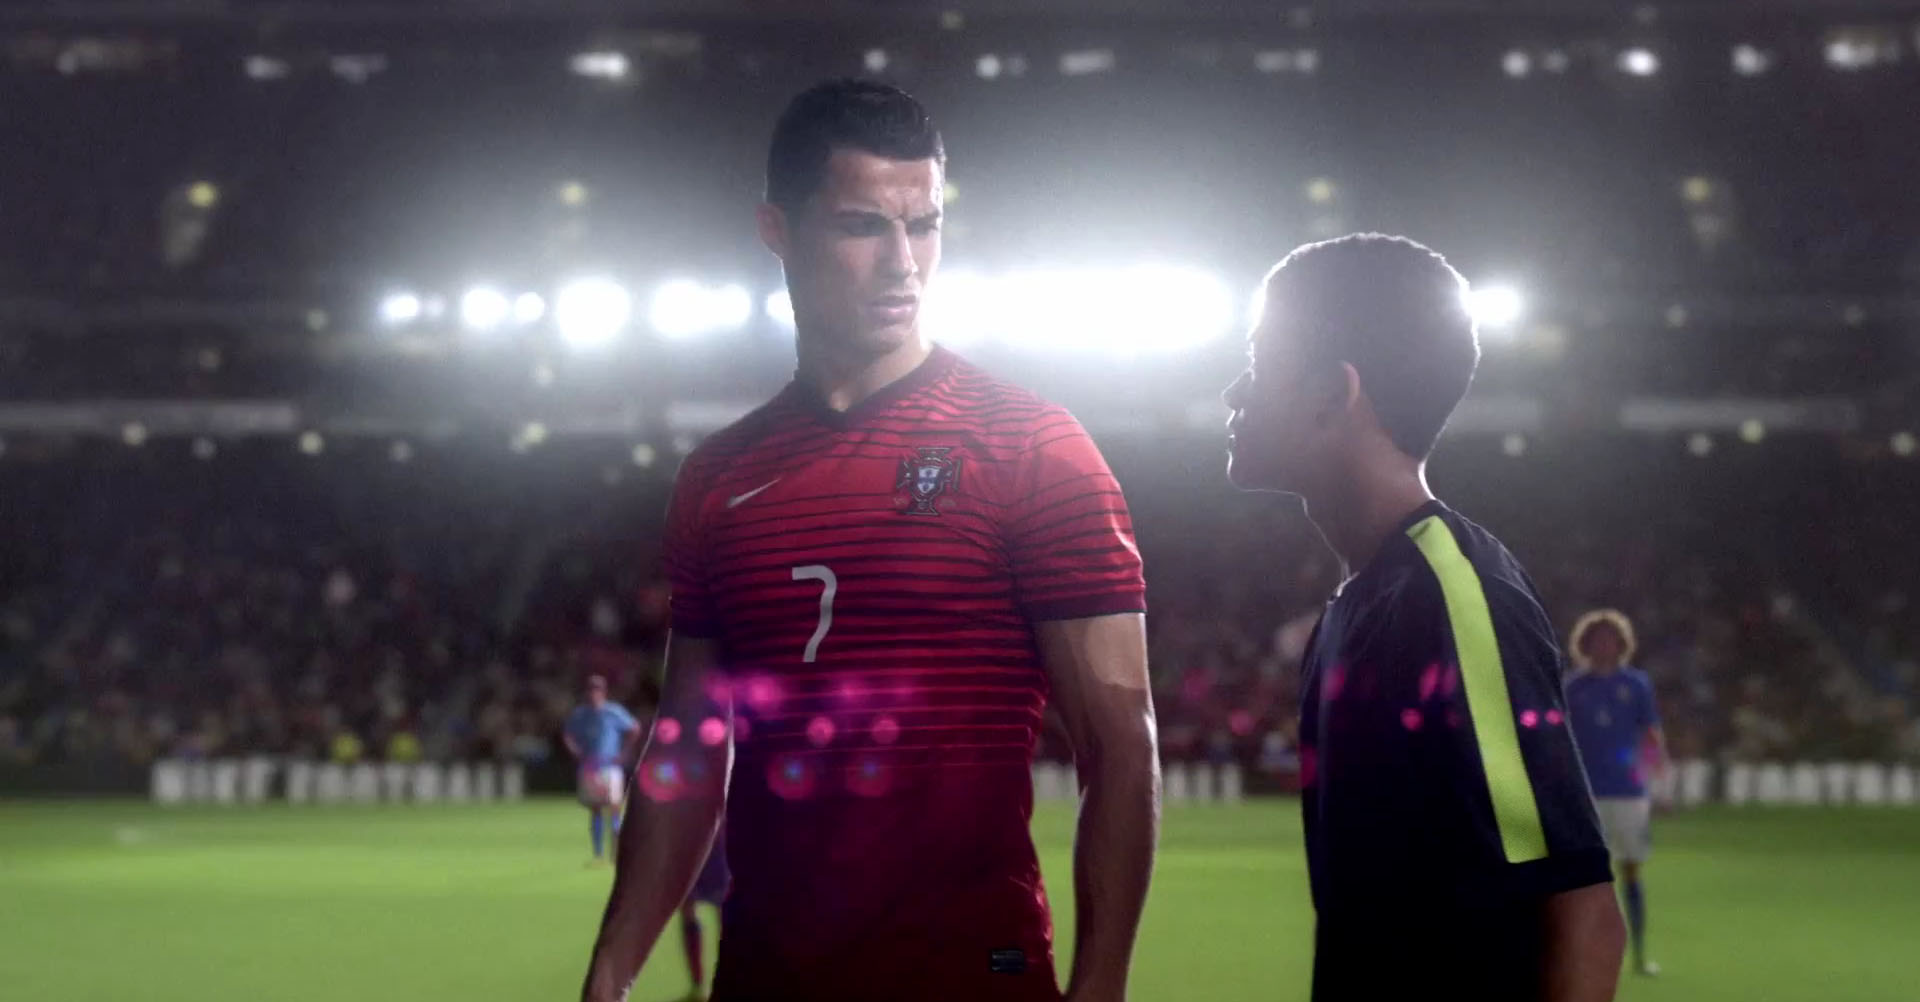 Cristiano Ronaldo stepping out for a fan to take the penalty-kick in the ad for Nike